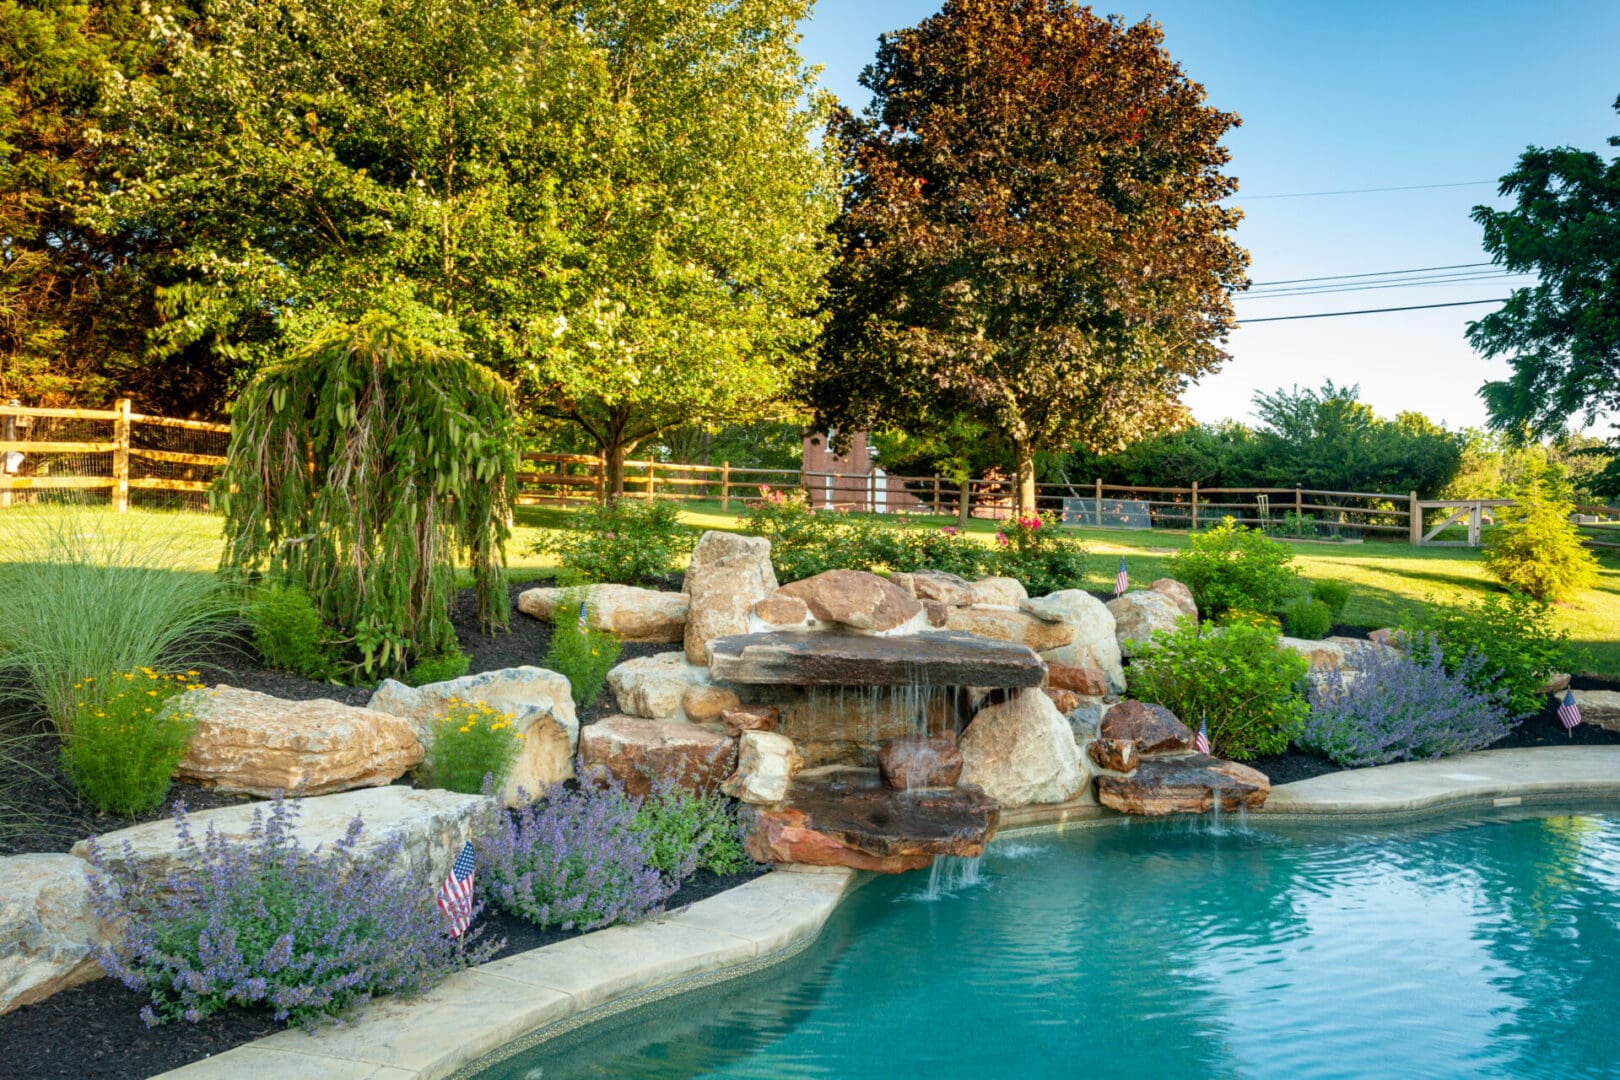 A swimming pool with water features and landscaping including a waterfall.